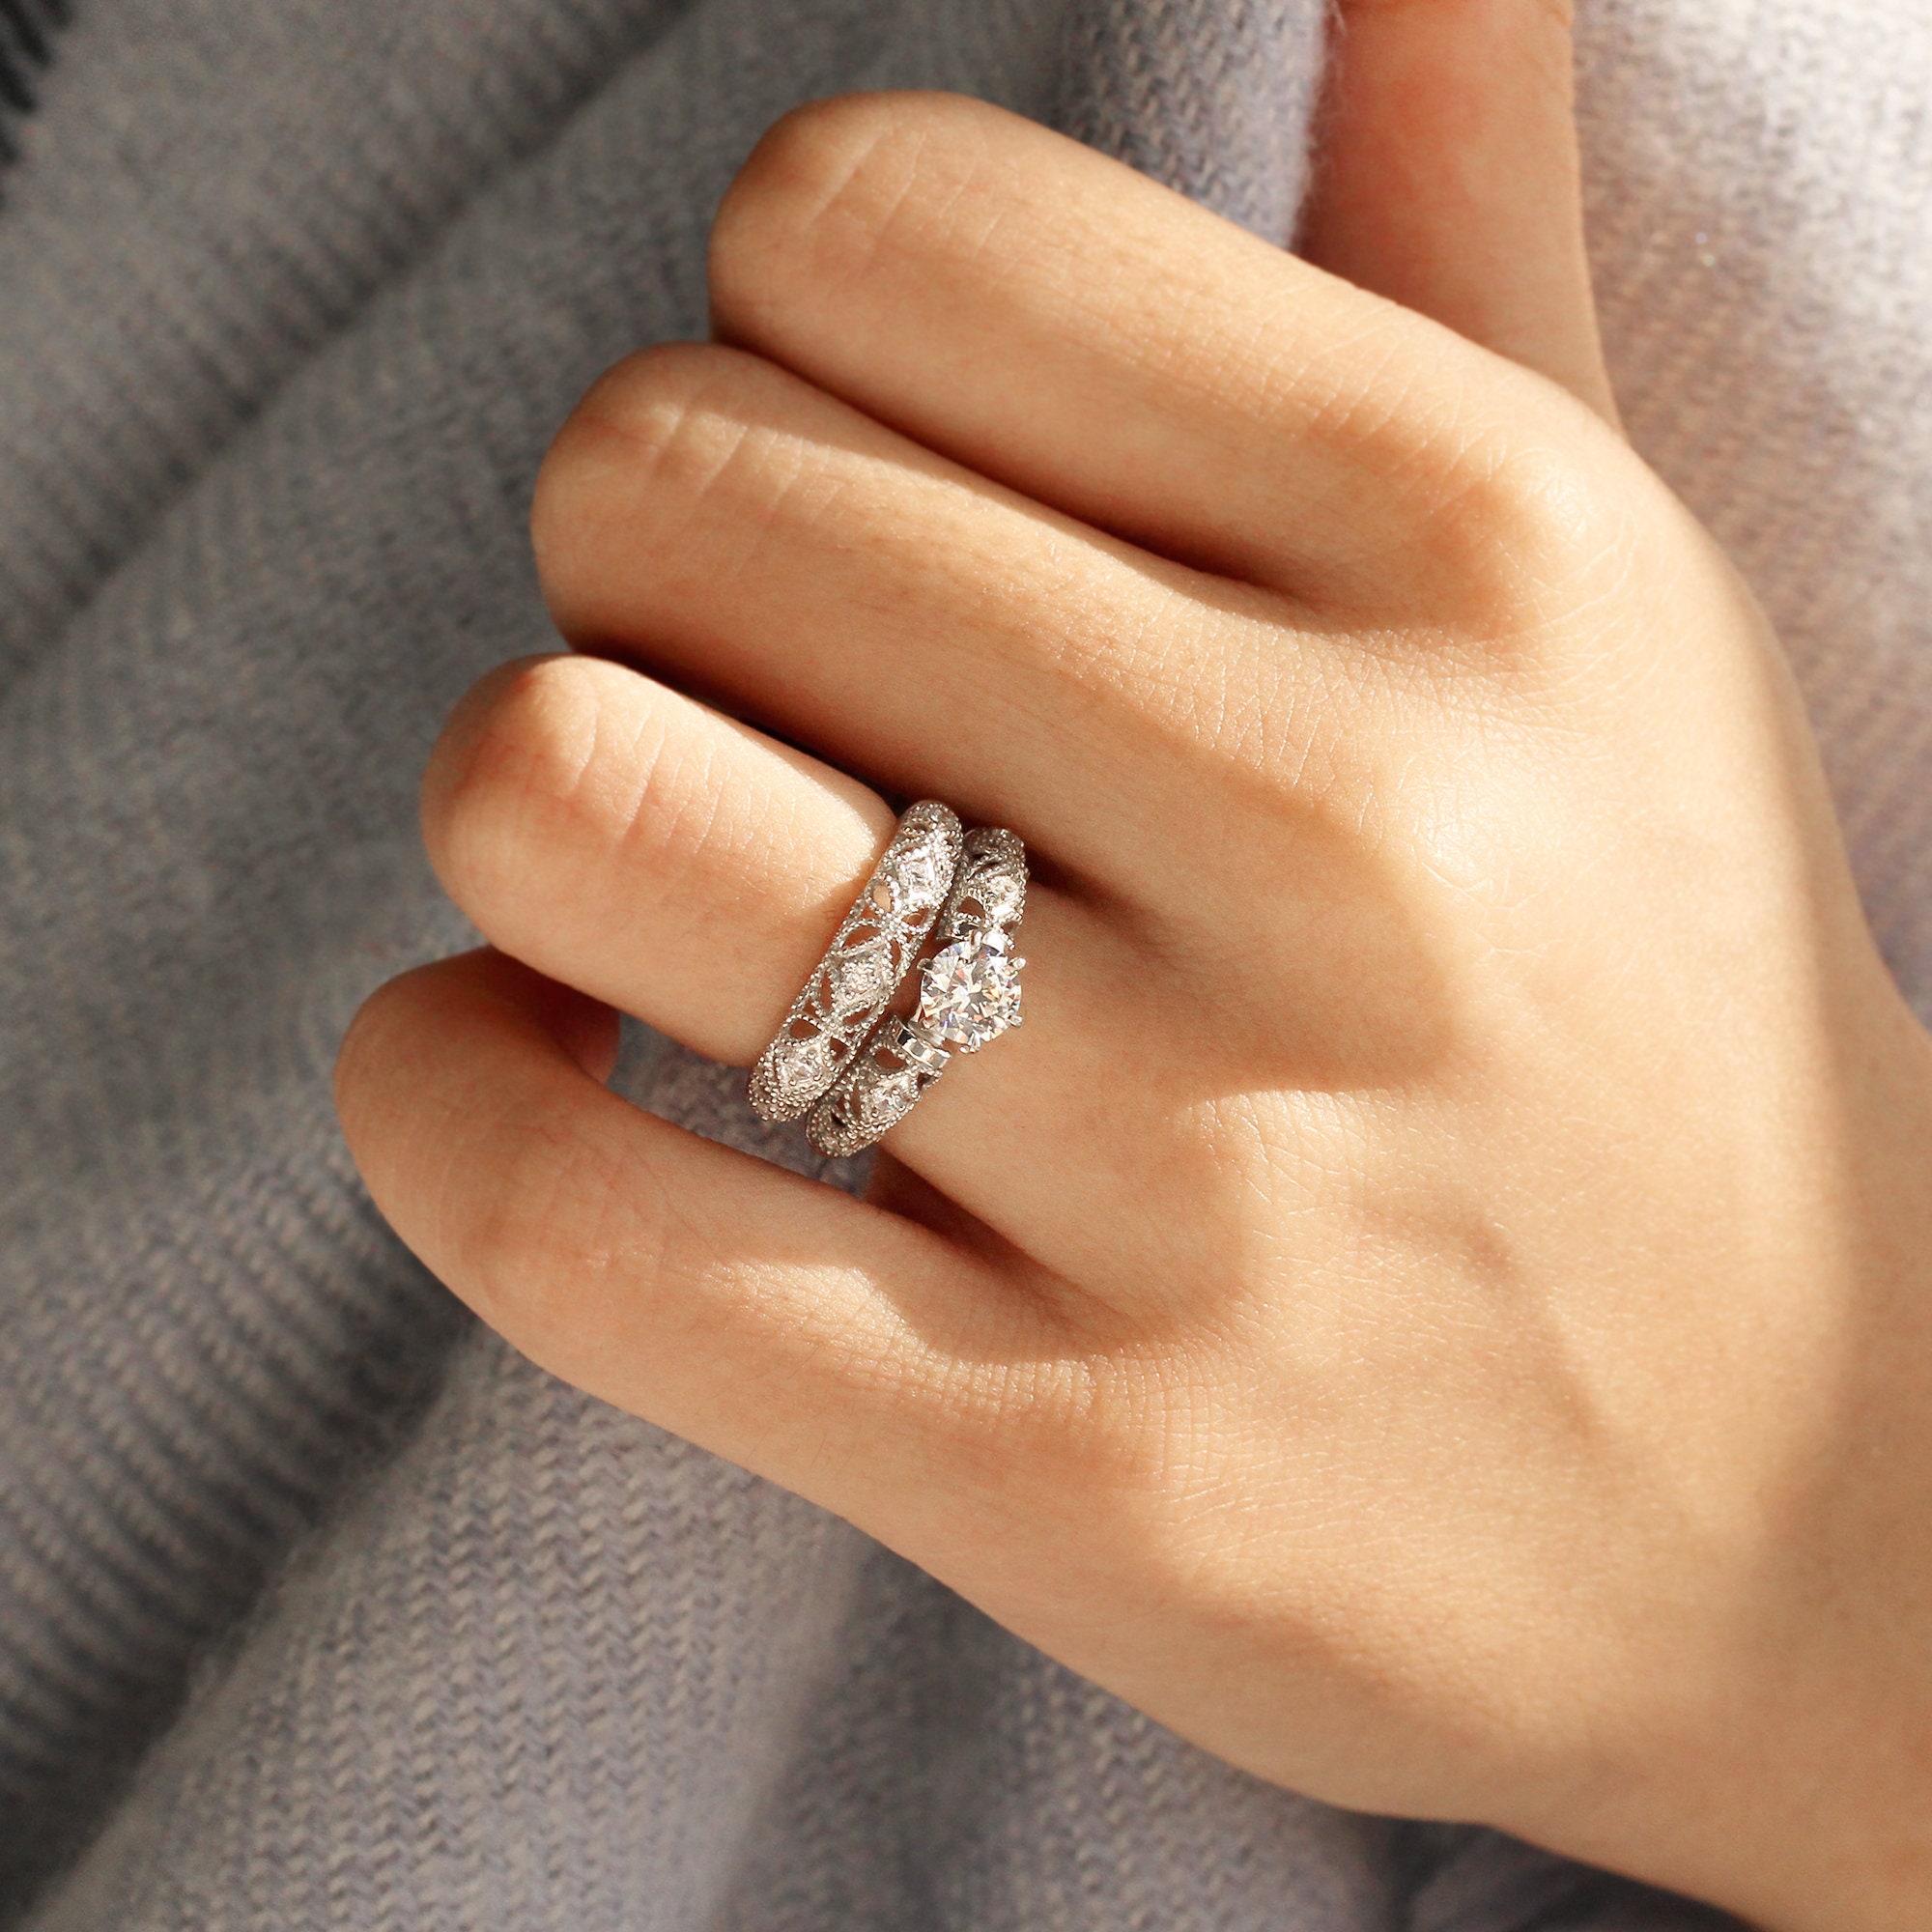 Engagement Ring Styles: The Definitive Guide - Clean Origin